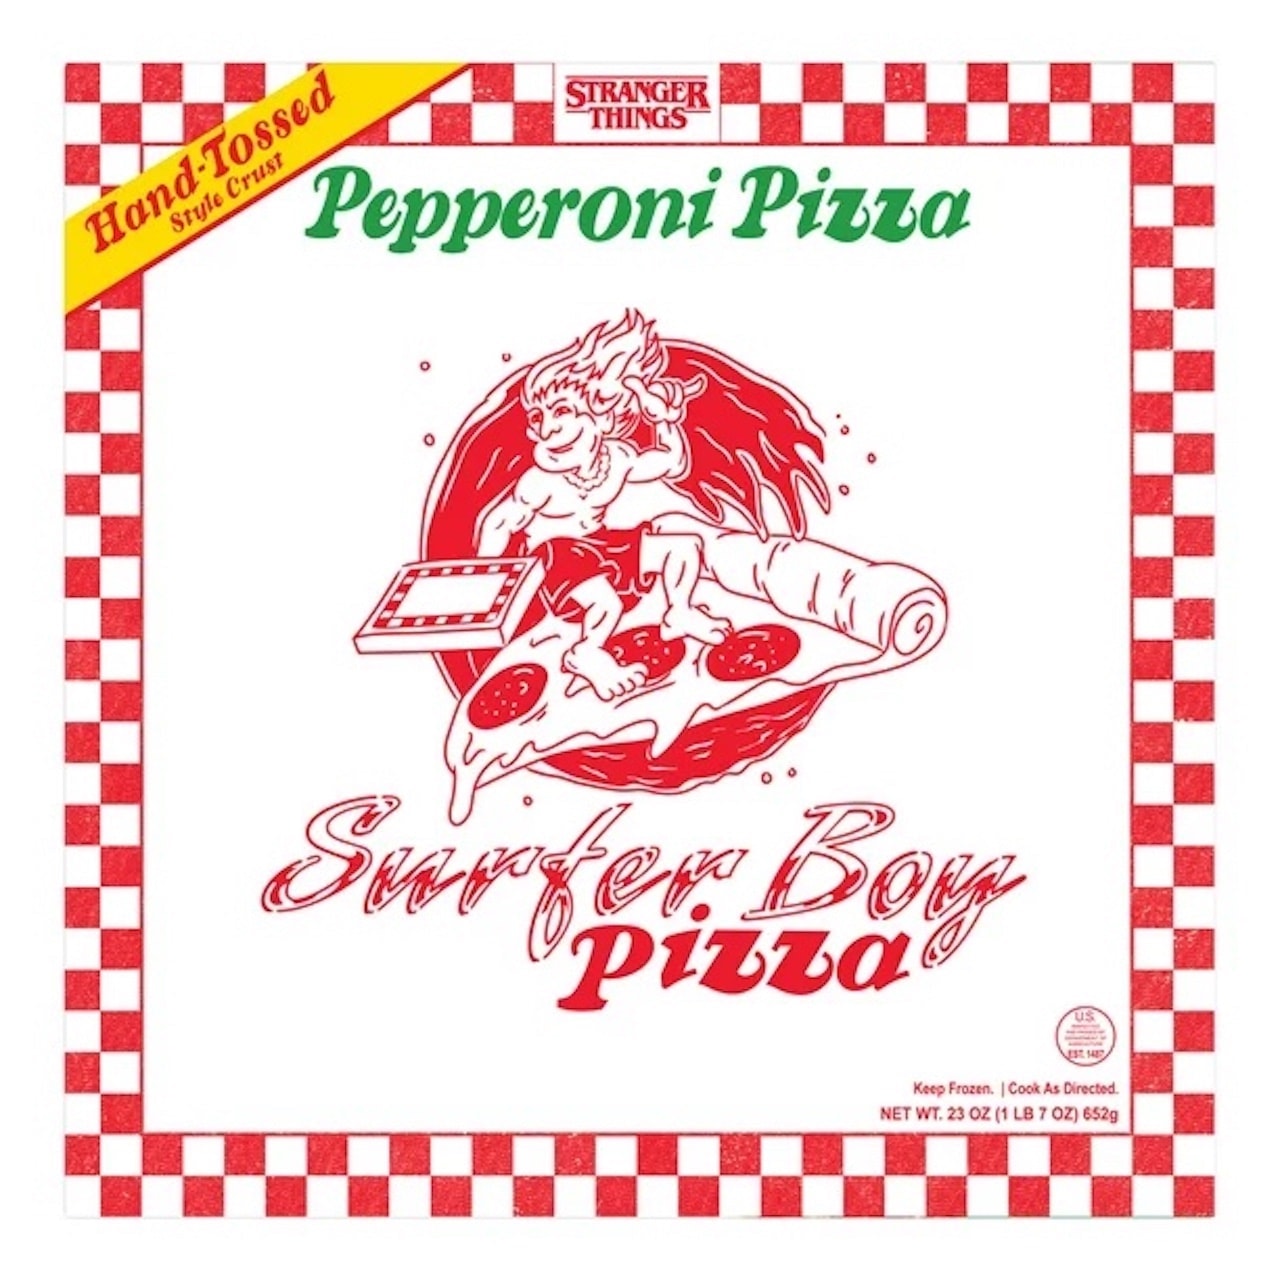 stranger things halloween party theme surfer boy pizza